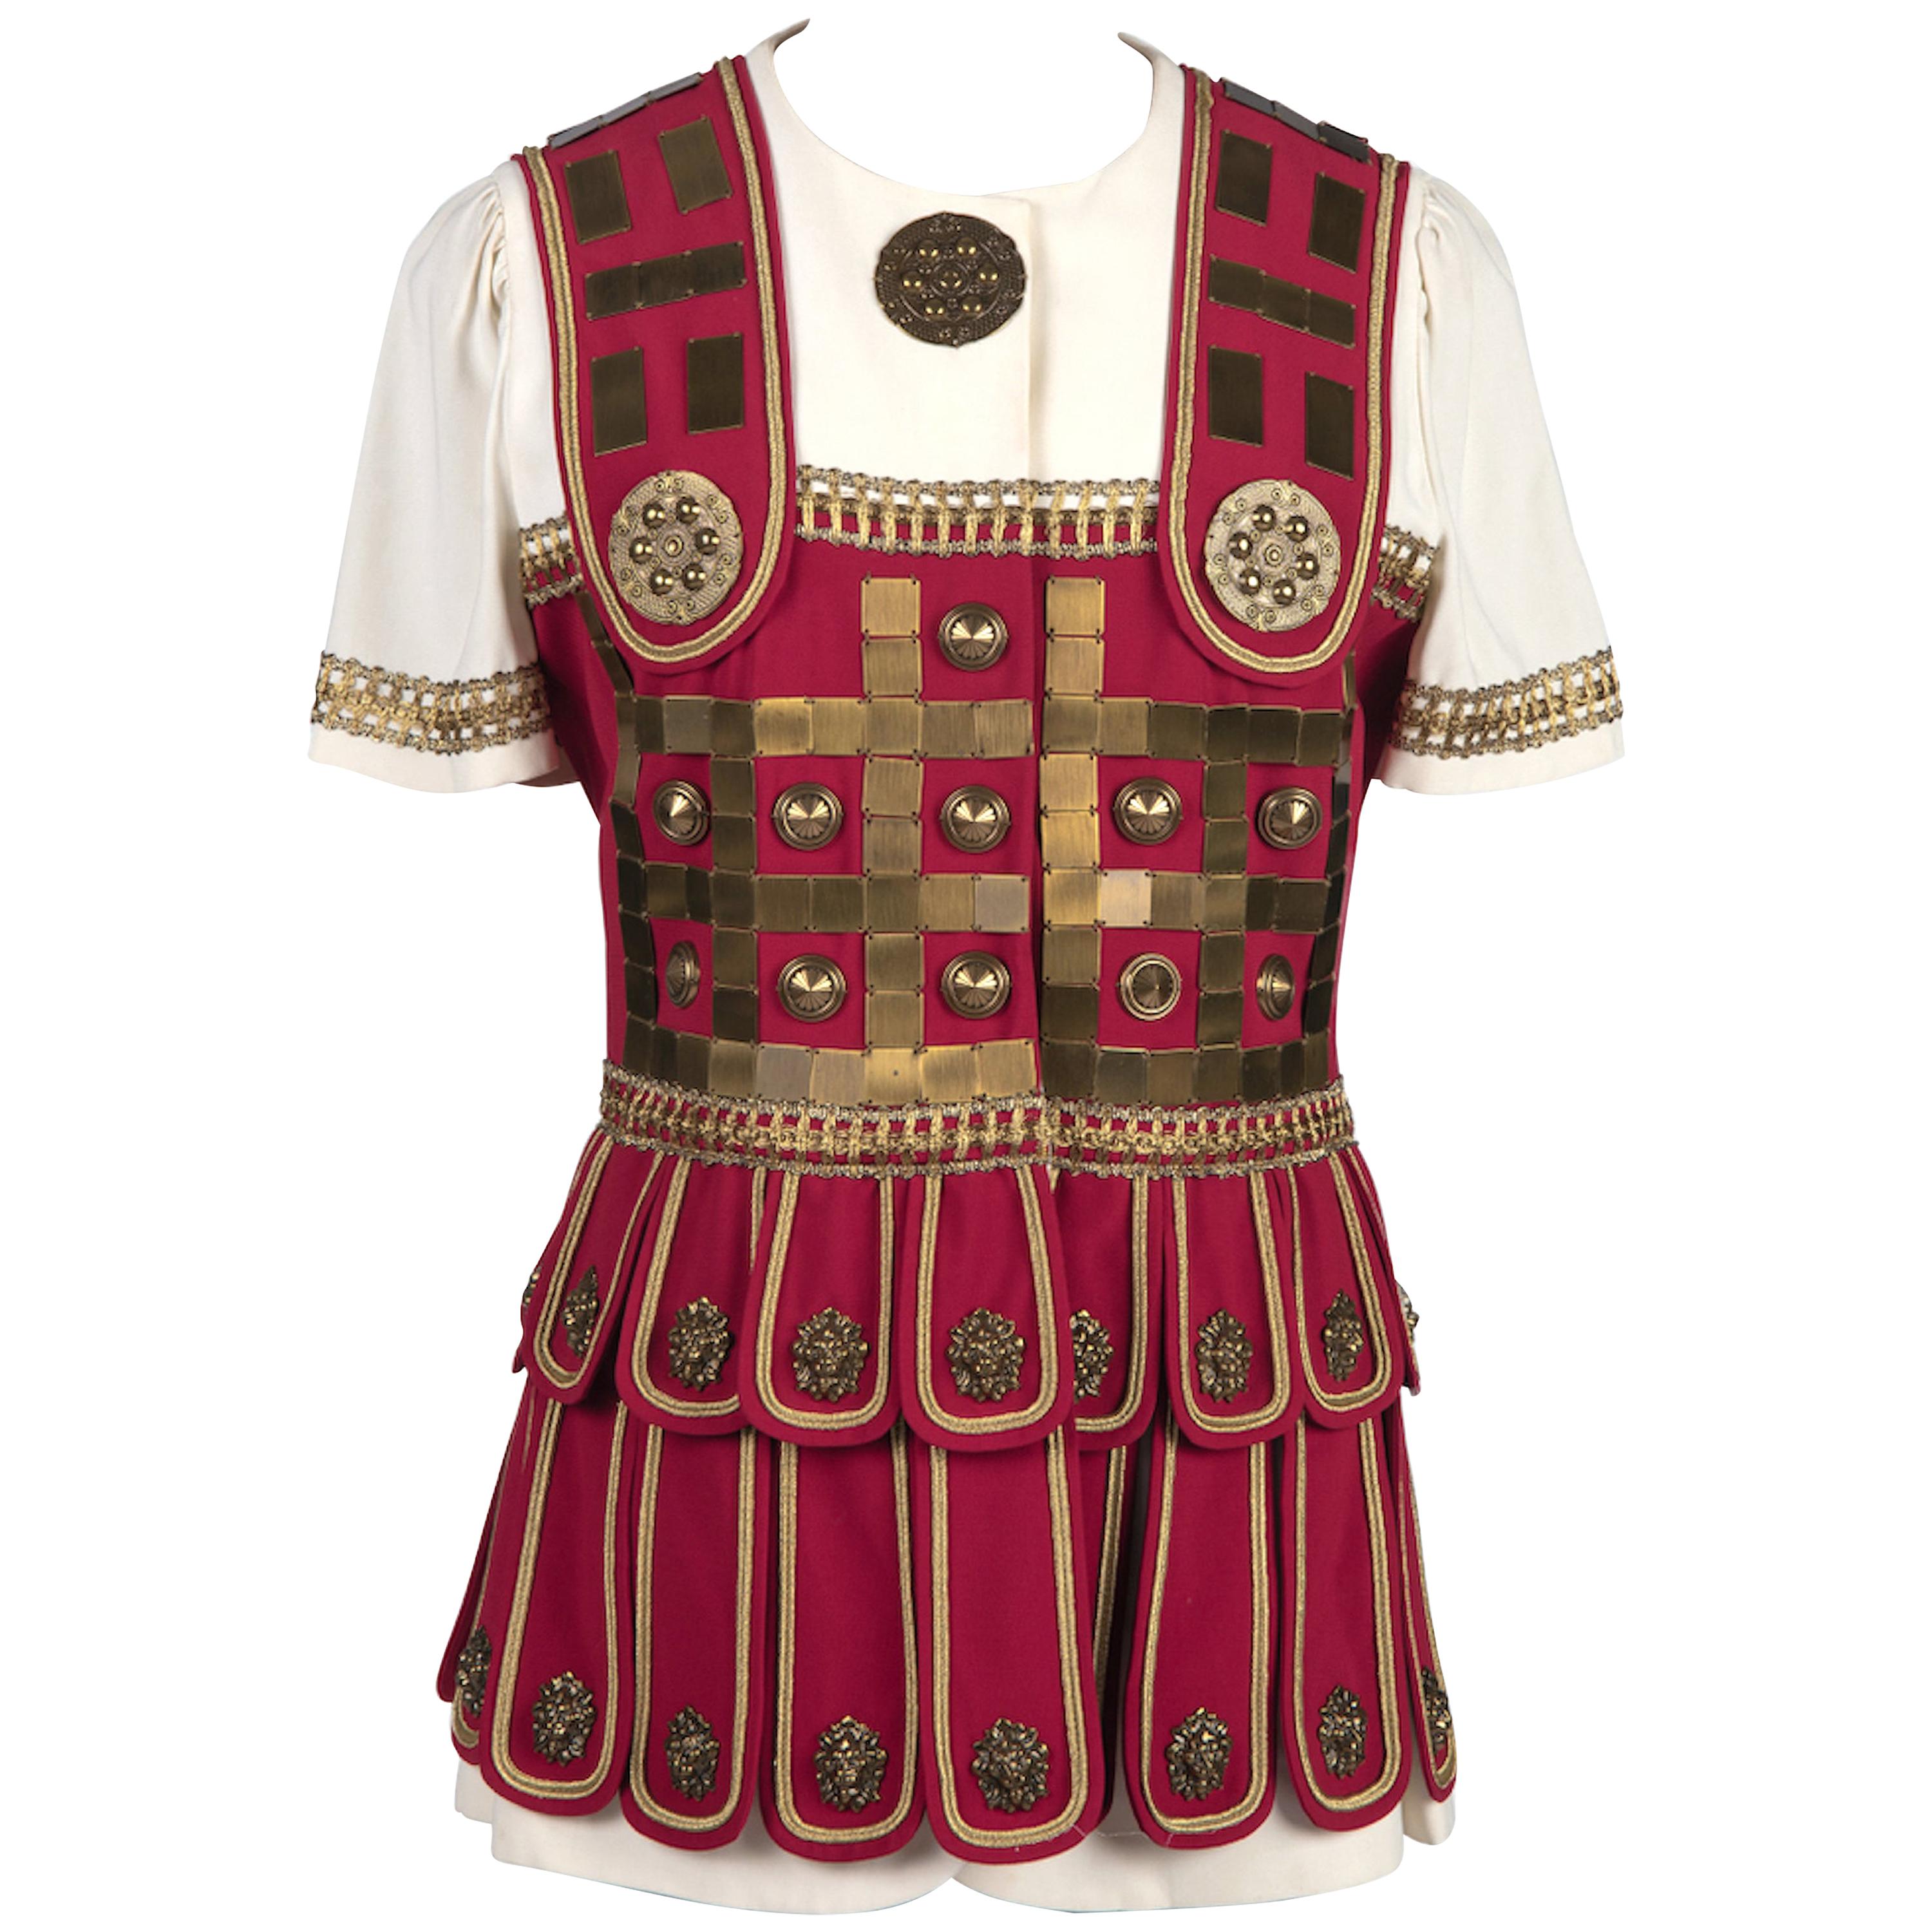 S/S 1994 MOSCHINO COUTURE Roman Centurion Red White Brass Metal Ornaments Jacket For Sale